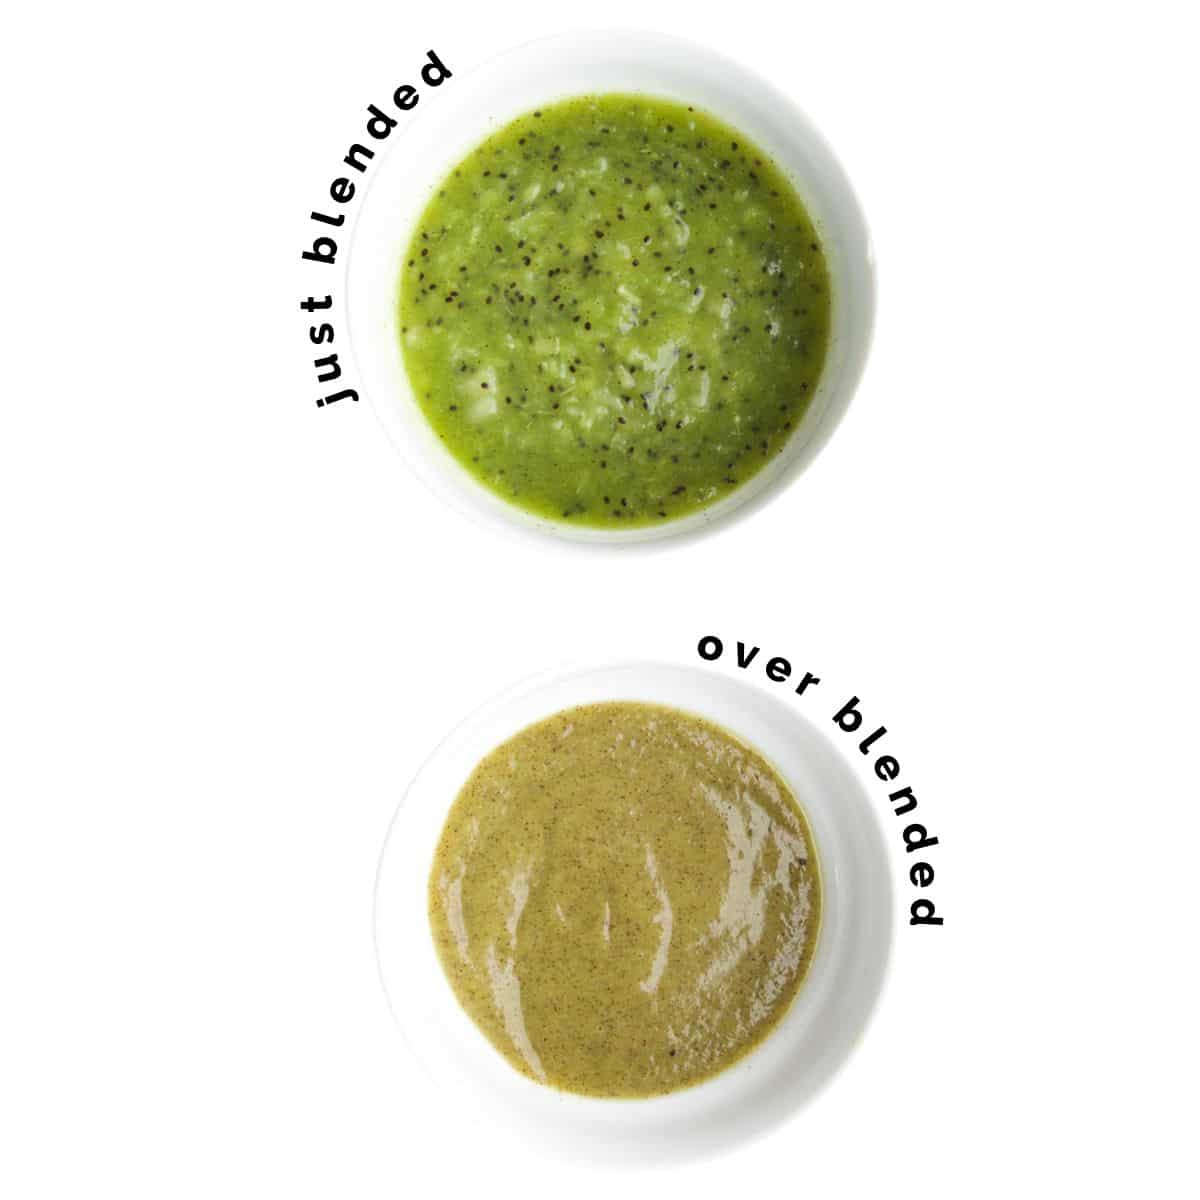 Two Bowls of Kiwi Puree The First Shows Kiwi Puree That is Just Blended and The Second Bowl Shows Kiwi Puree That is Over Blended.